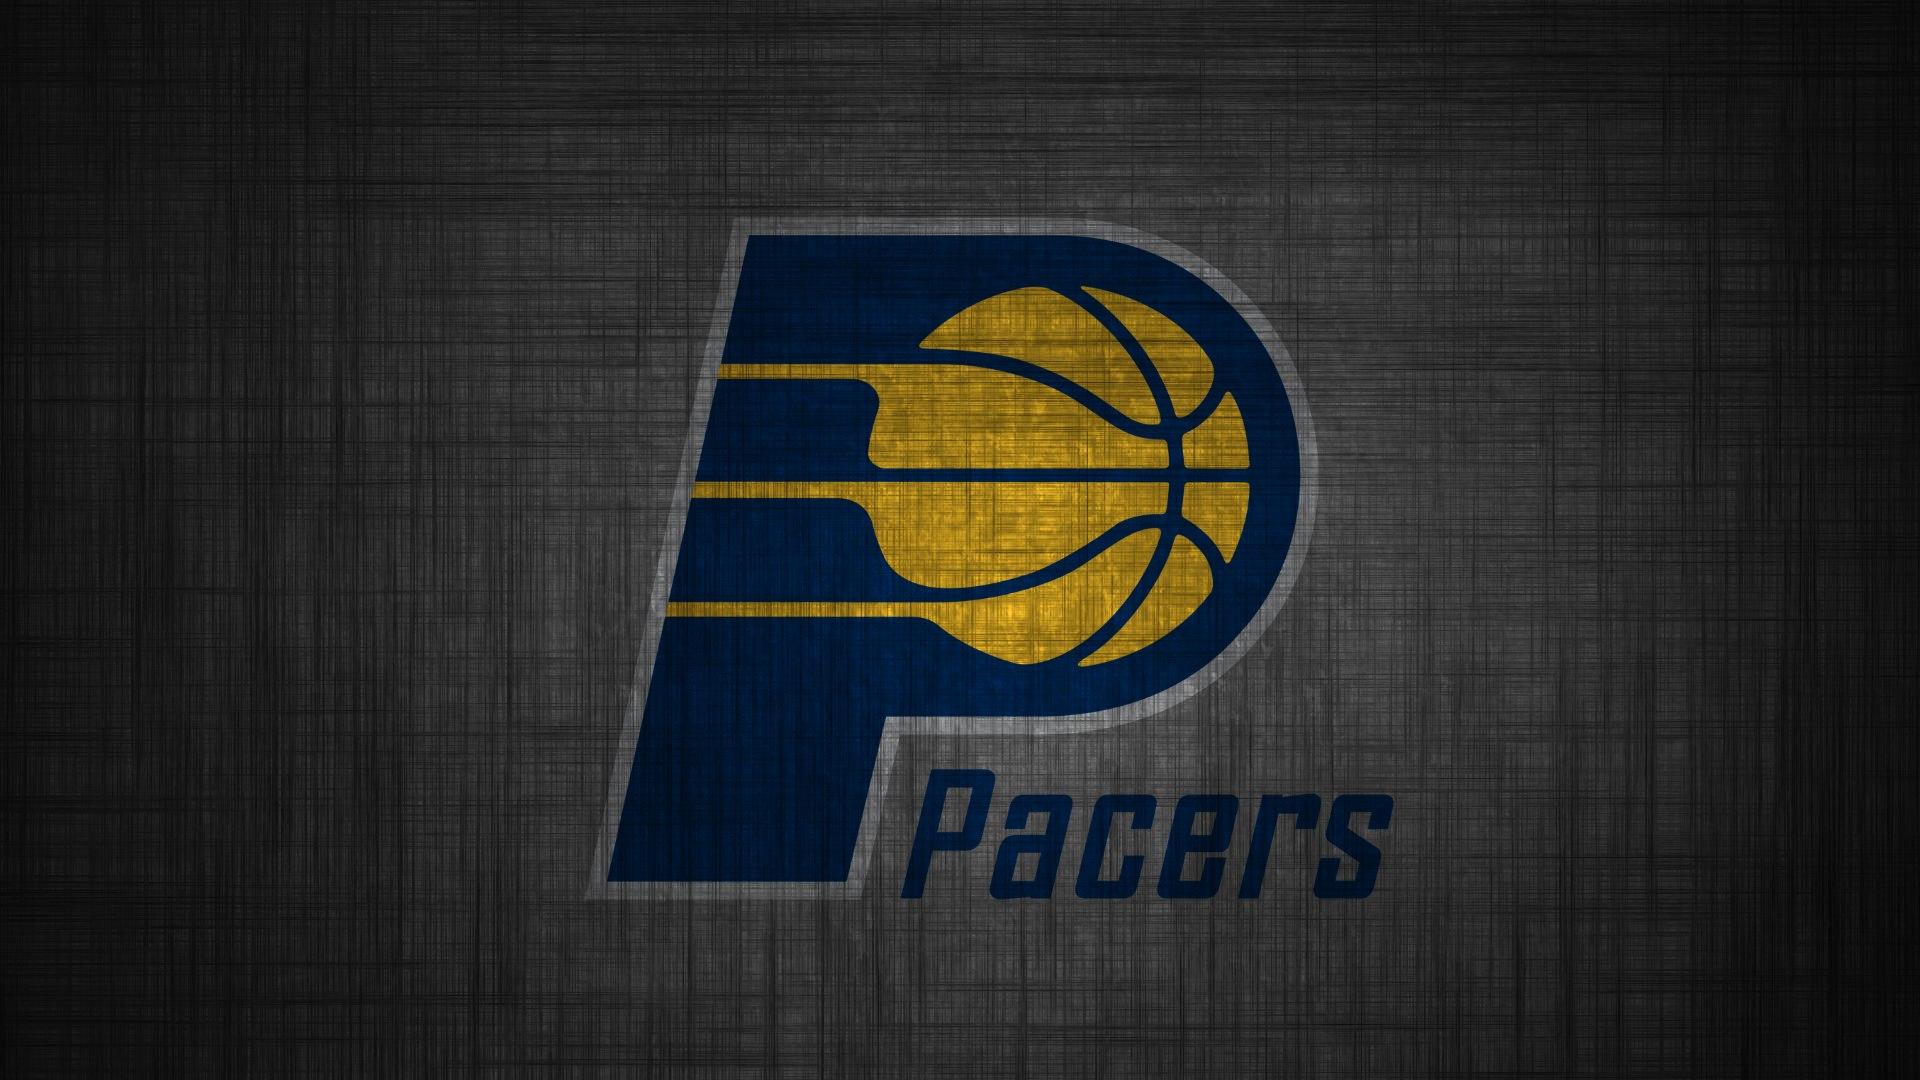 Indiana Pacers Wallpaper 3   1920 X 1080 stmednet